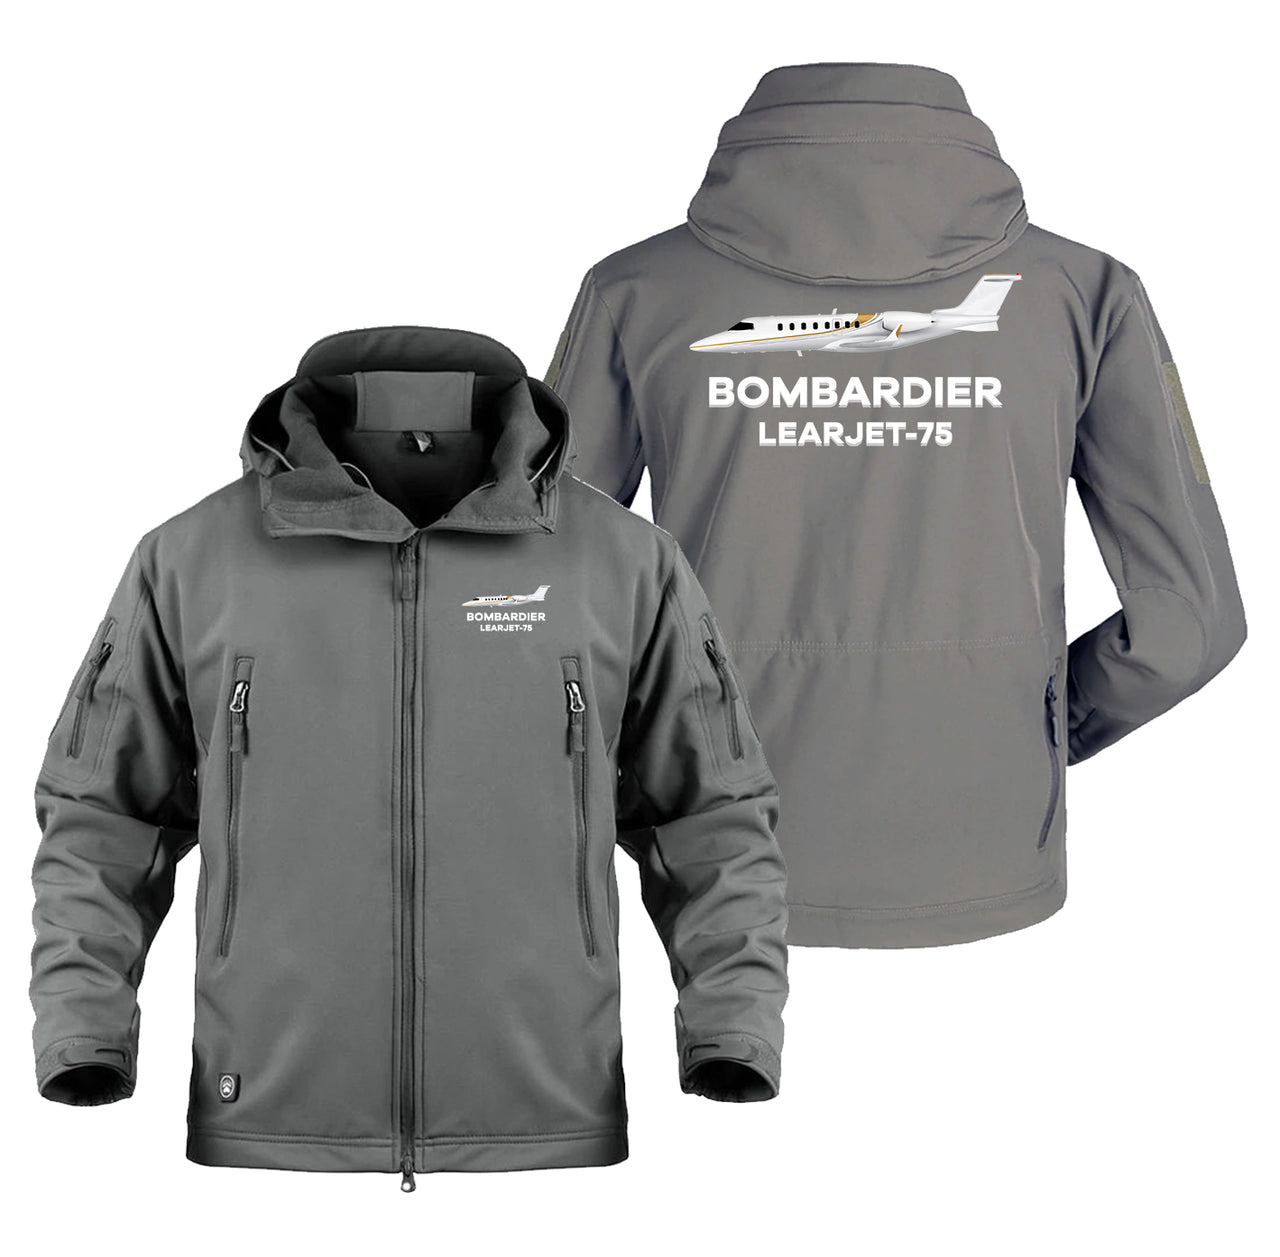 The Bombardier Learjet 75 Designed Military Jackets (Customizable)